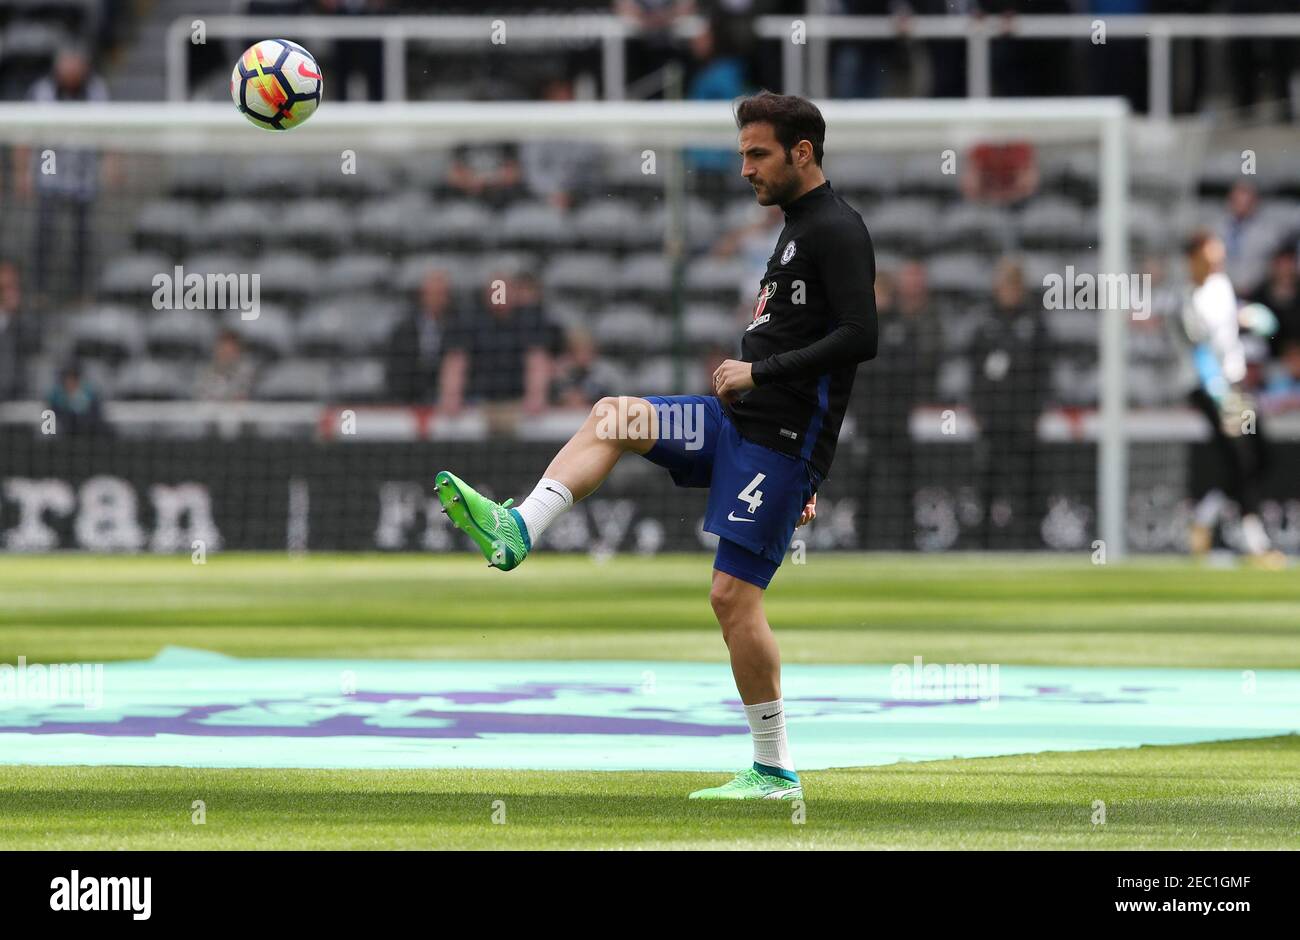 Soccer Football - Premier League - Newcastle United vs Chelsea - St James' Park, Newcastle, Britain - May 13, 2018   Chelsea's Cesc Fabregas during the warm up before the match   REUTERS/Scott Heppell    EDITORIAL USE ONLY. No use with unauthorized audio, video, data, fixture lists, club/league logos or 'live' services. Online in-match use limited to 75 images, no video emulation. No use in betting, games or single club/league/player publications.  Please contact your account representative for further details. Stock Photo